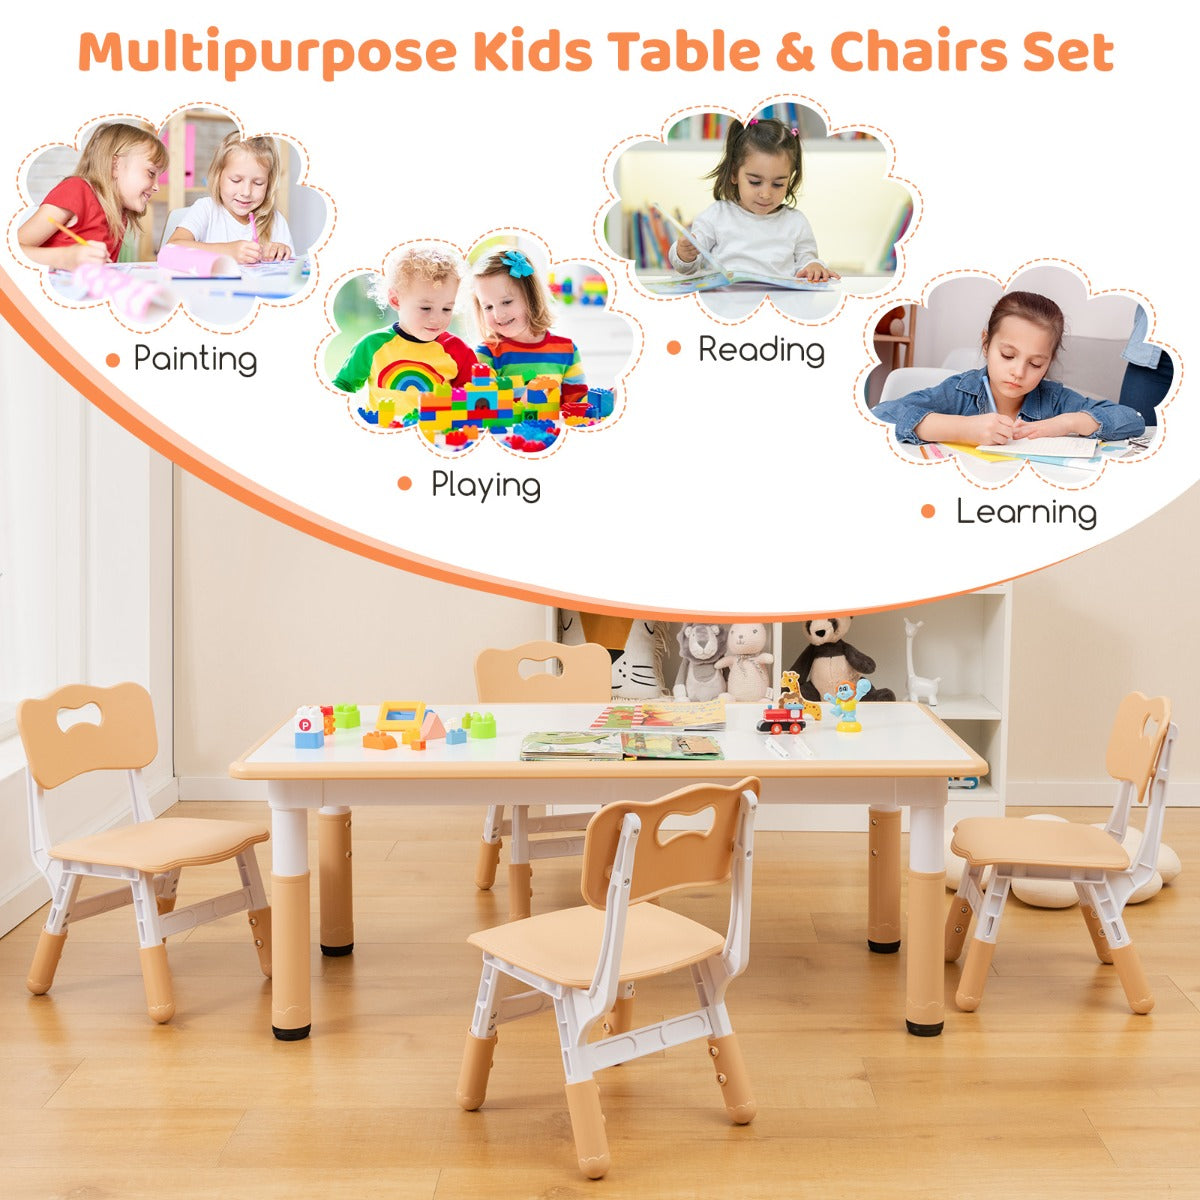 Kids Table and Chairs Set for 4 with Graffiti Desktop-Natural